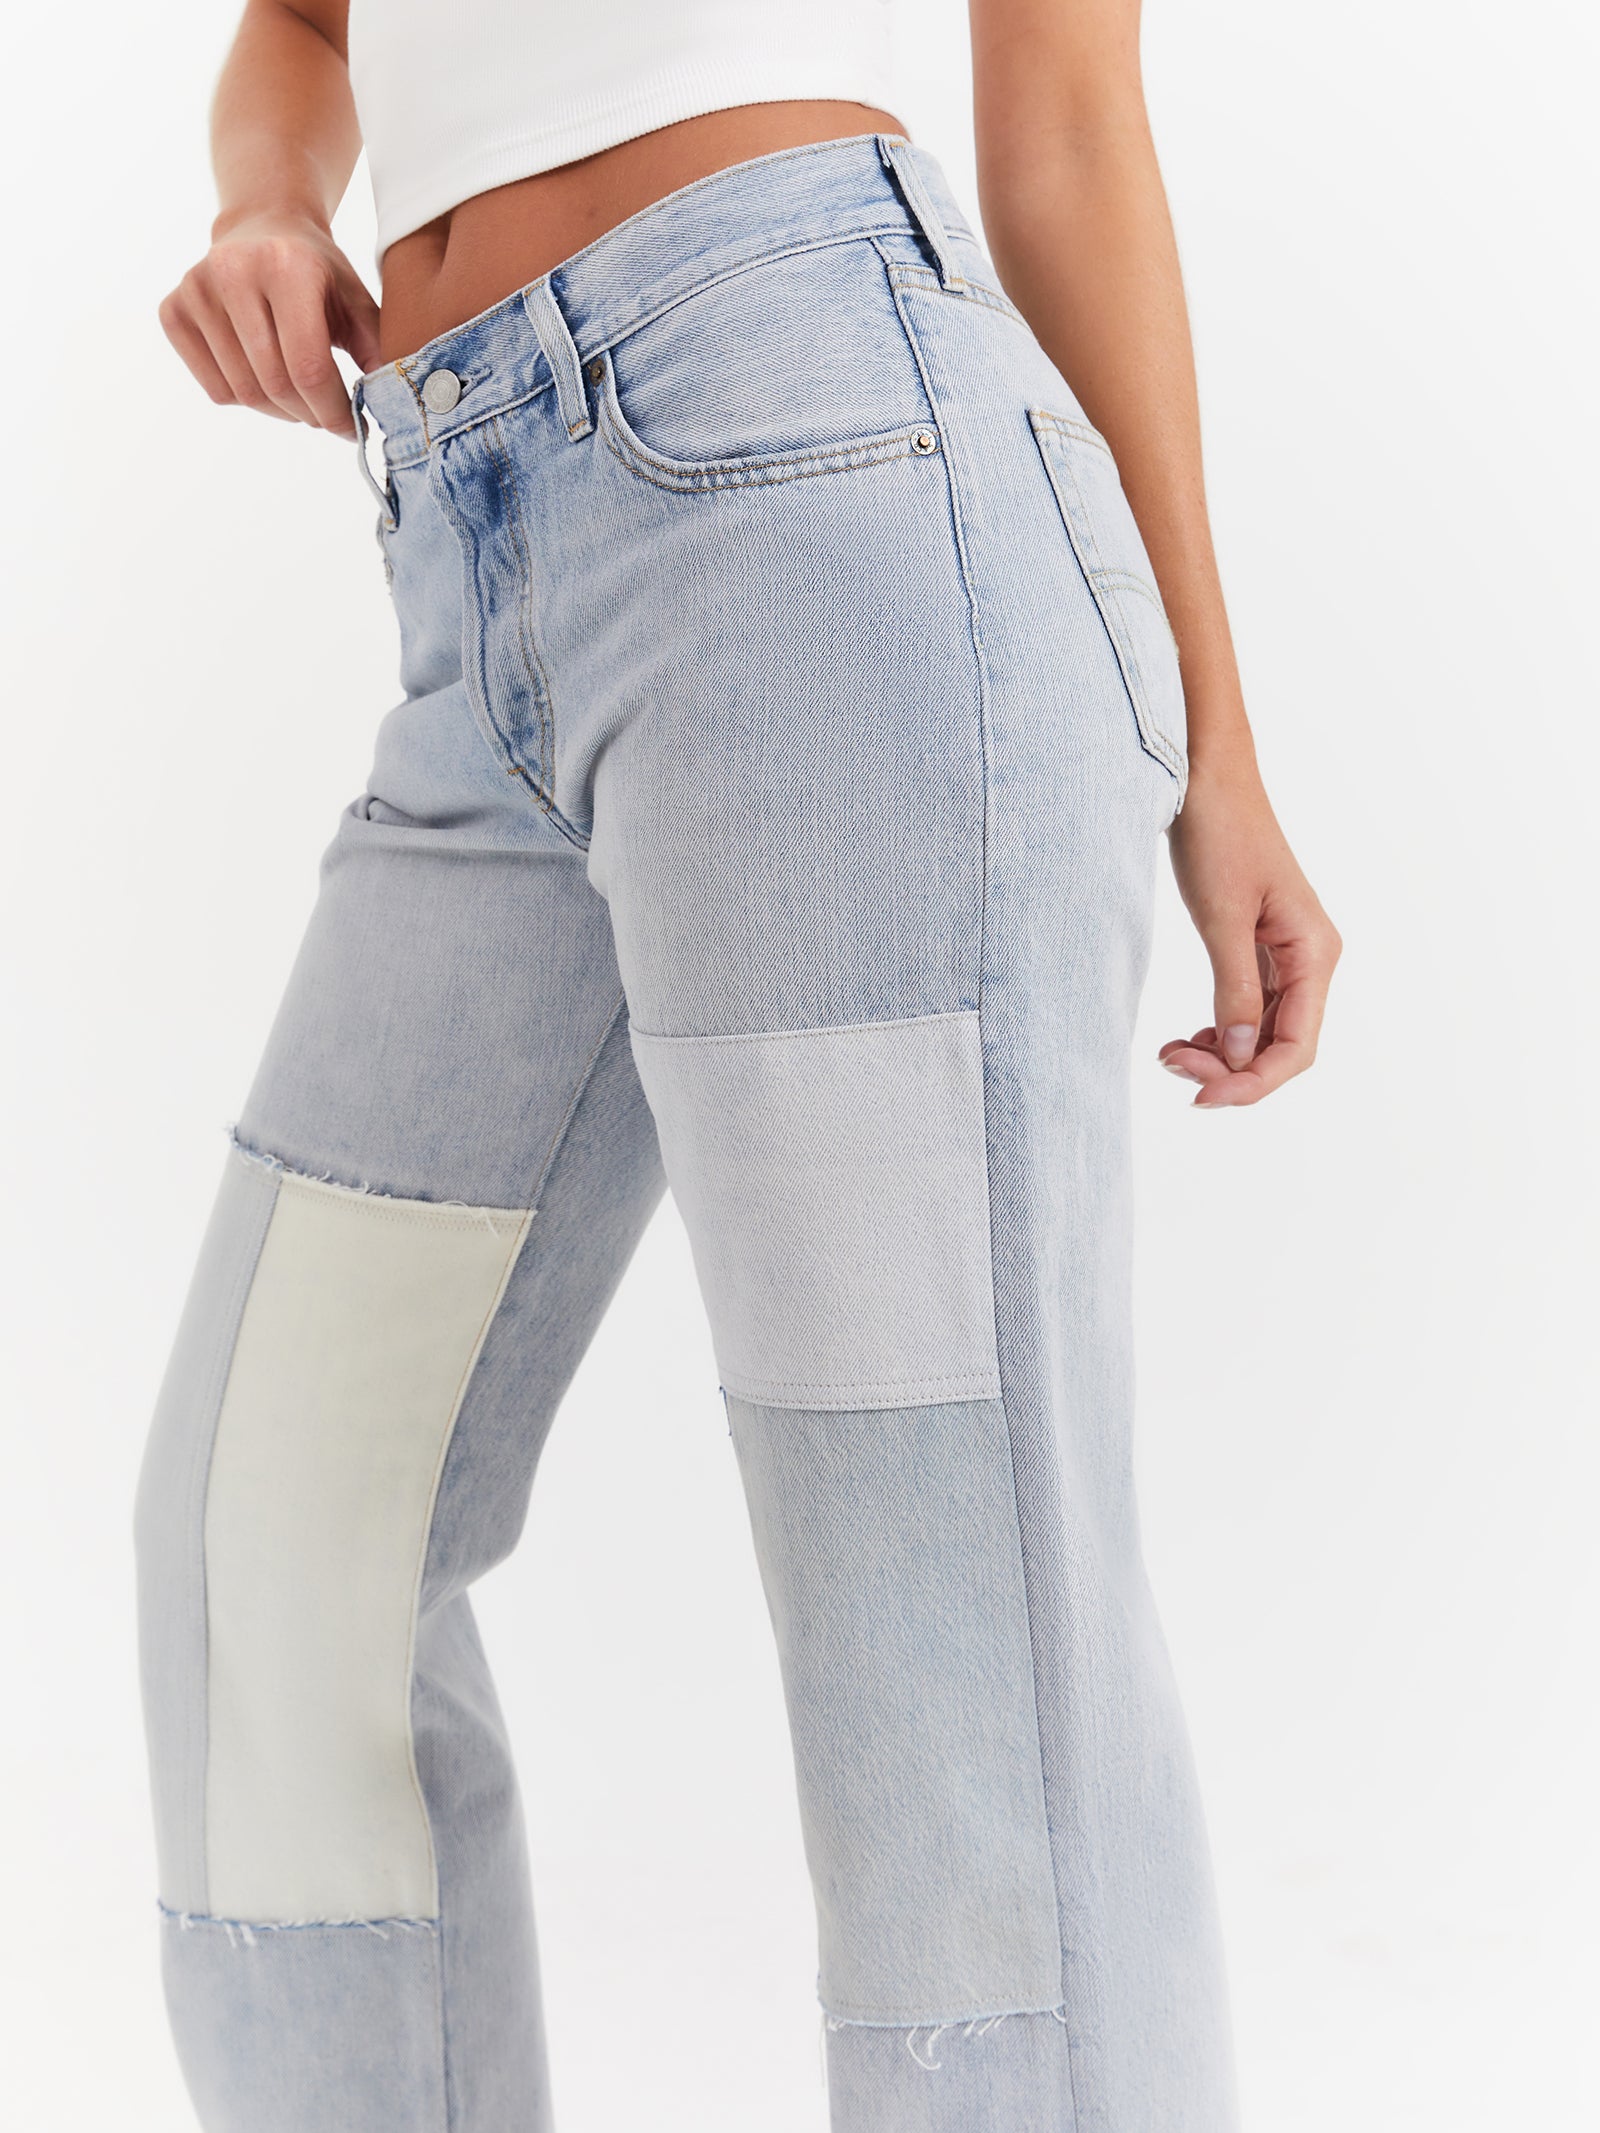 501 '90s Freehand Folk Jeans in Serious Sizzle